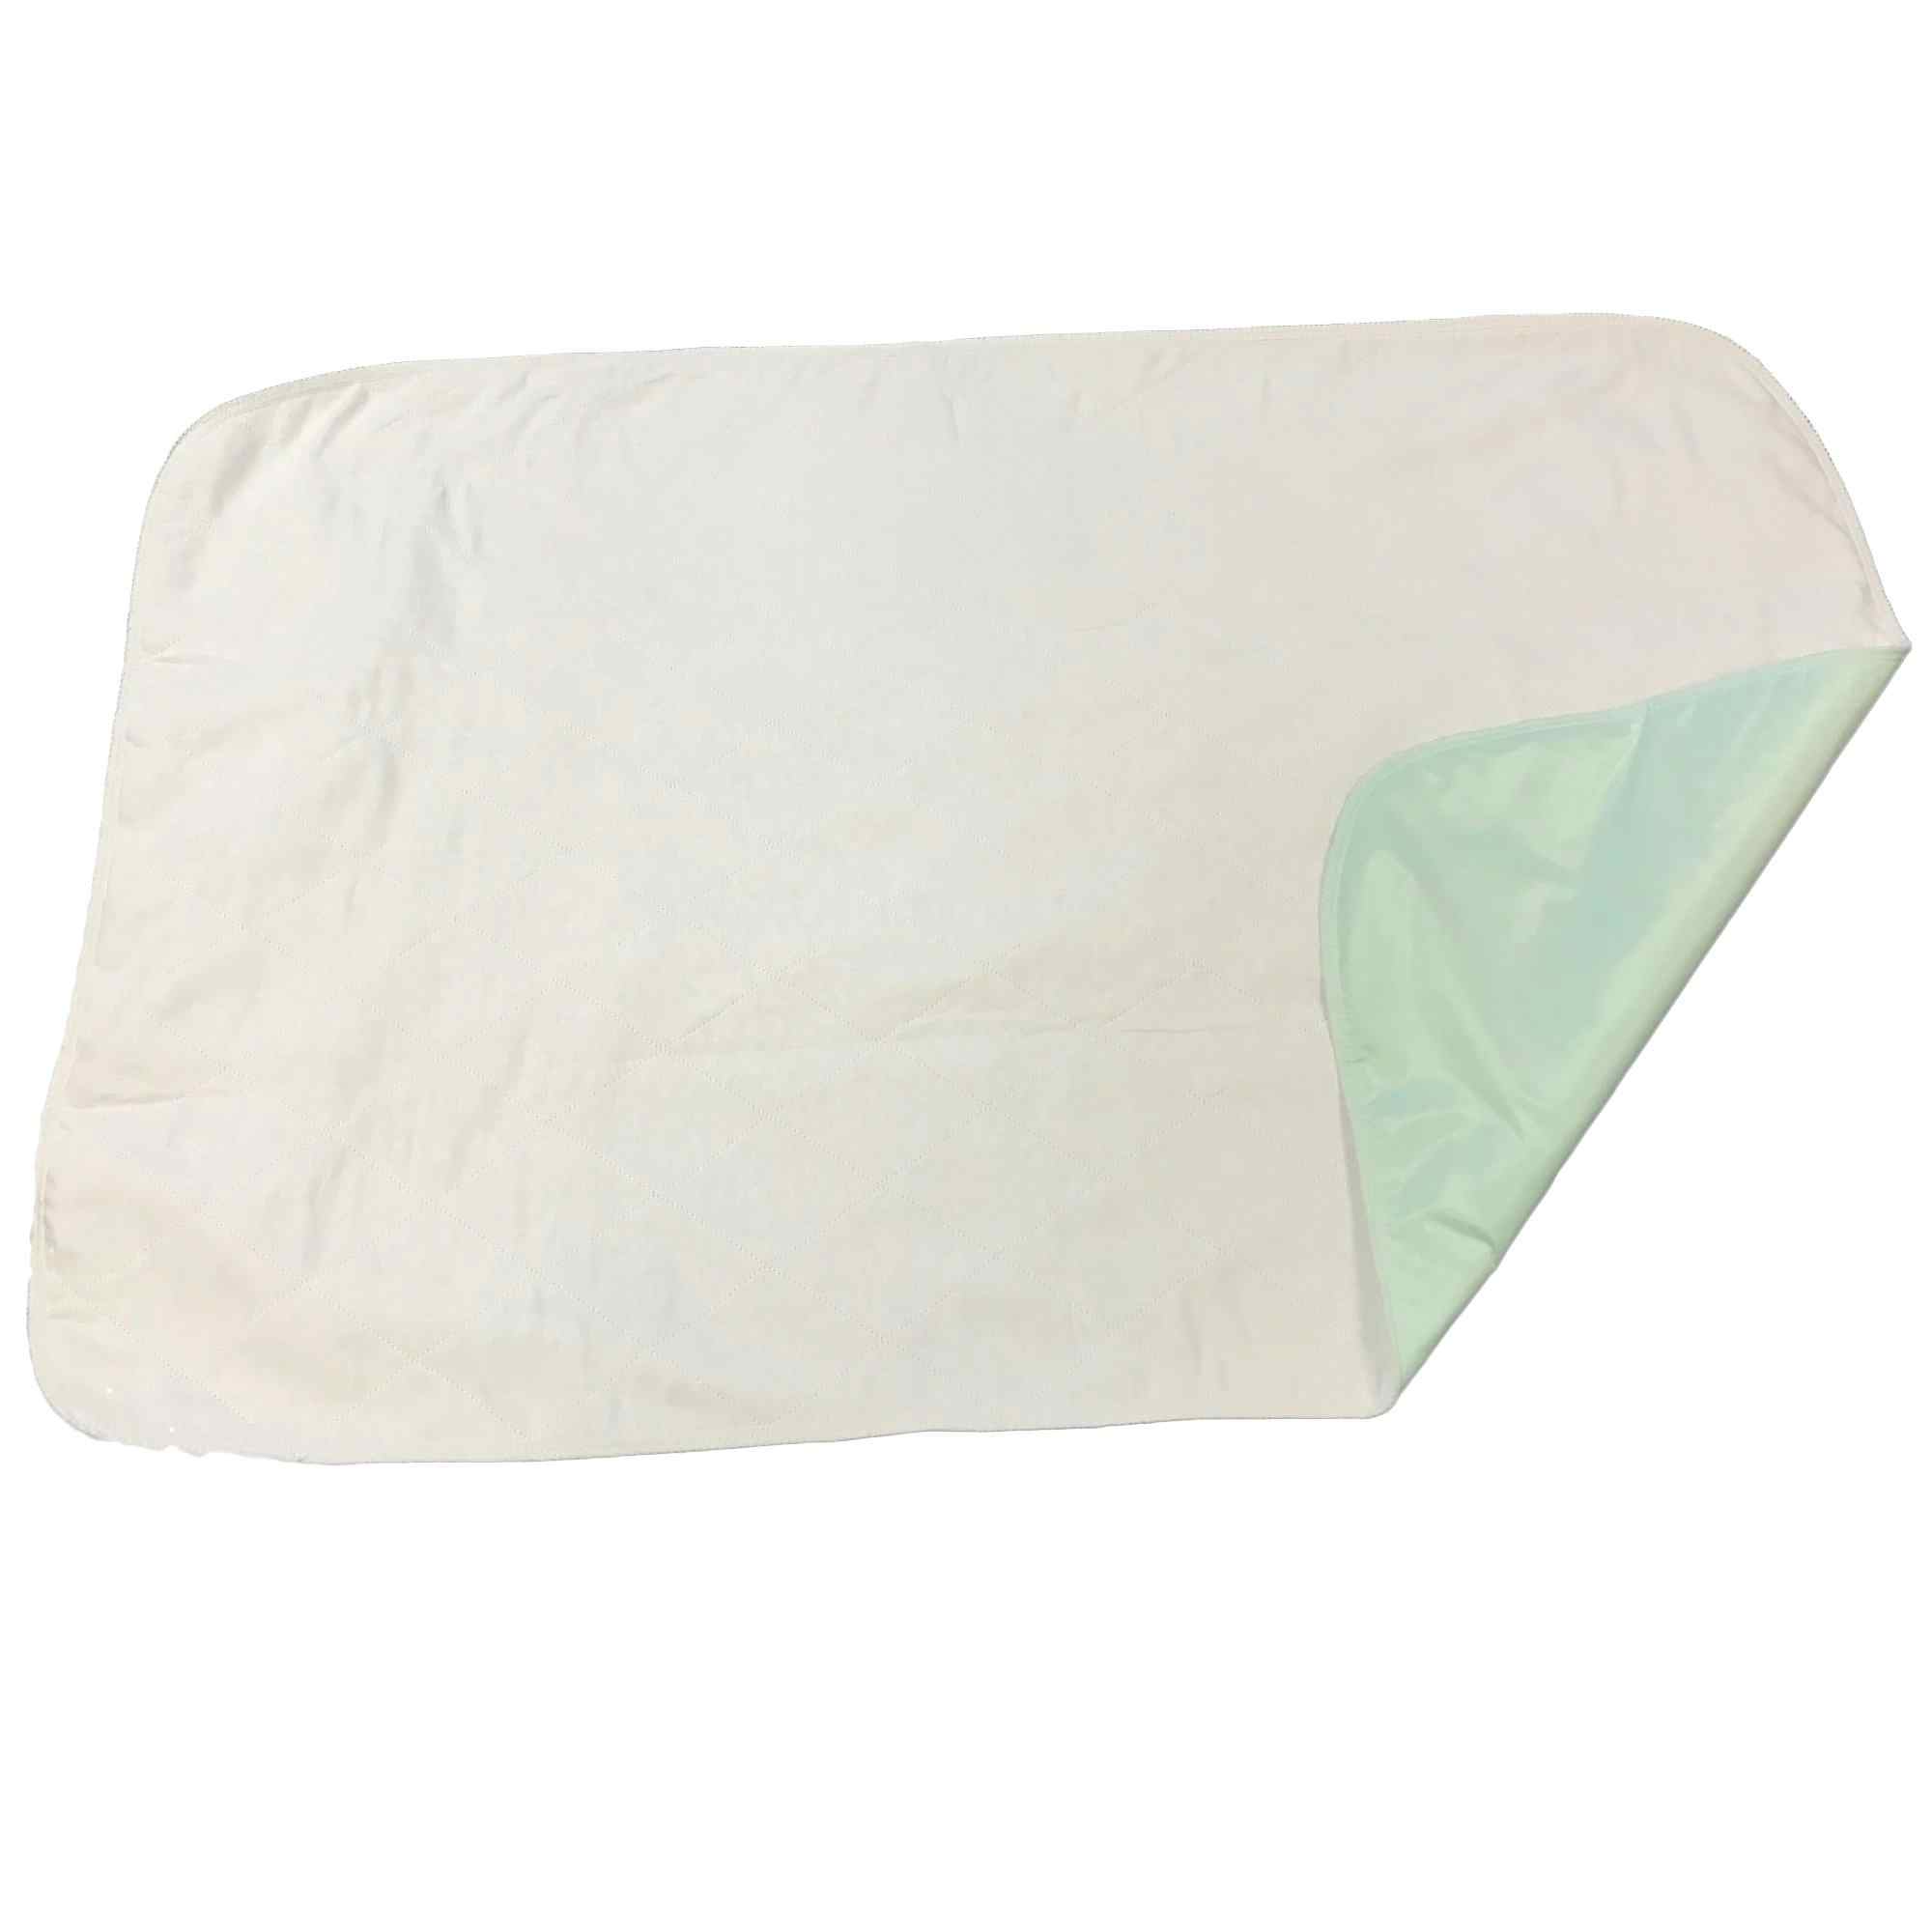 Beck's Classic Ibex Reusable Underpad, Green, Moderate Absorbency, 7155GRN-PB, 34 X 54" - 1 Each